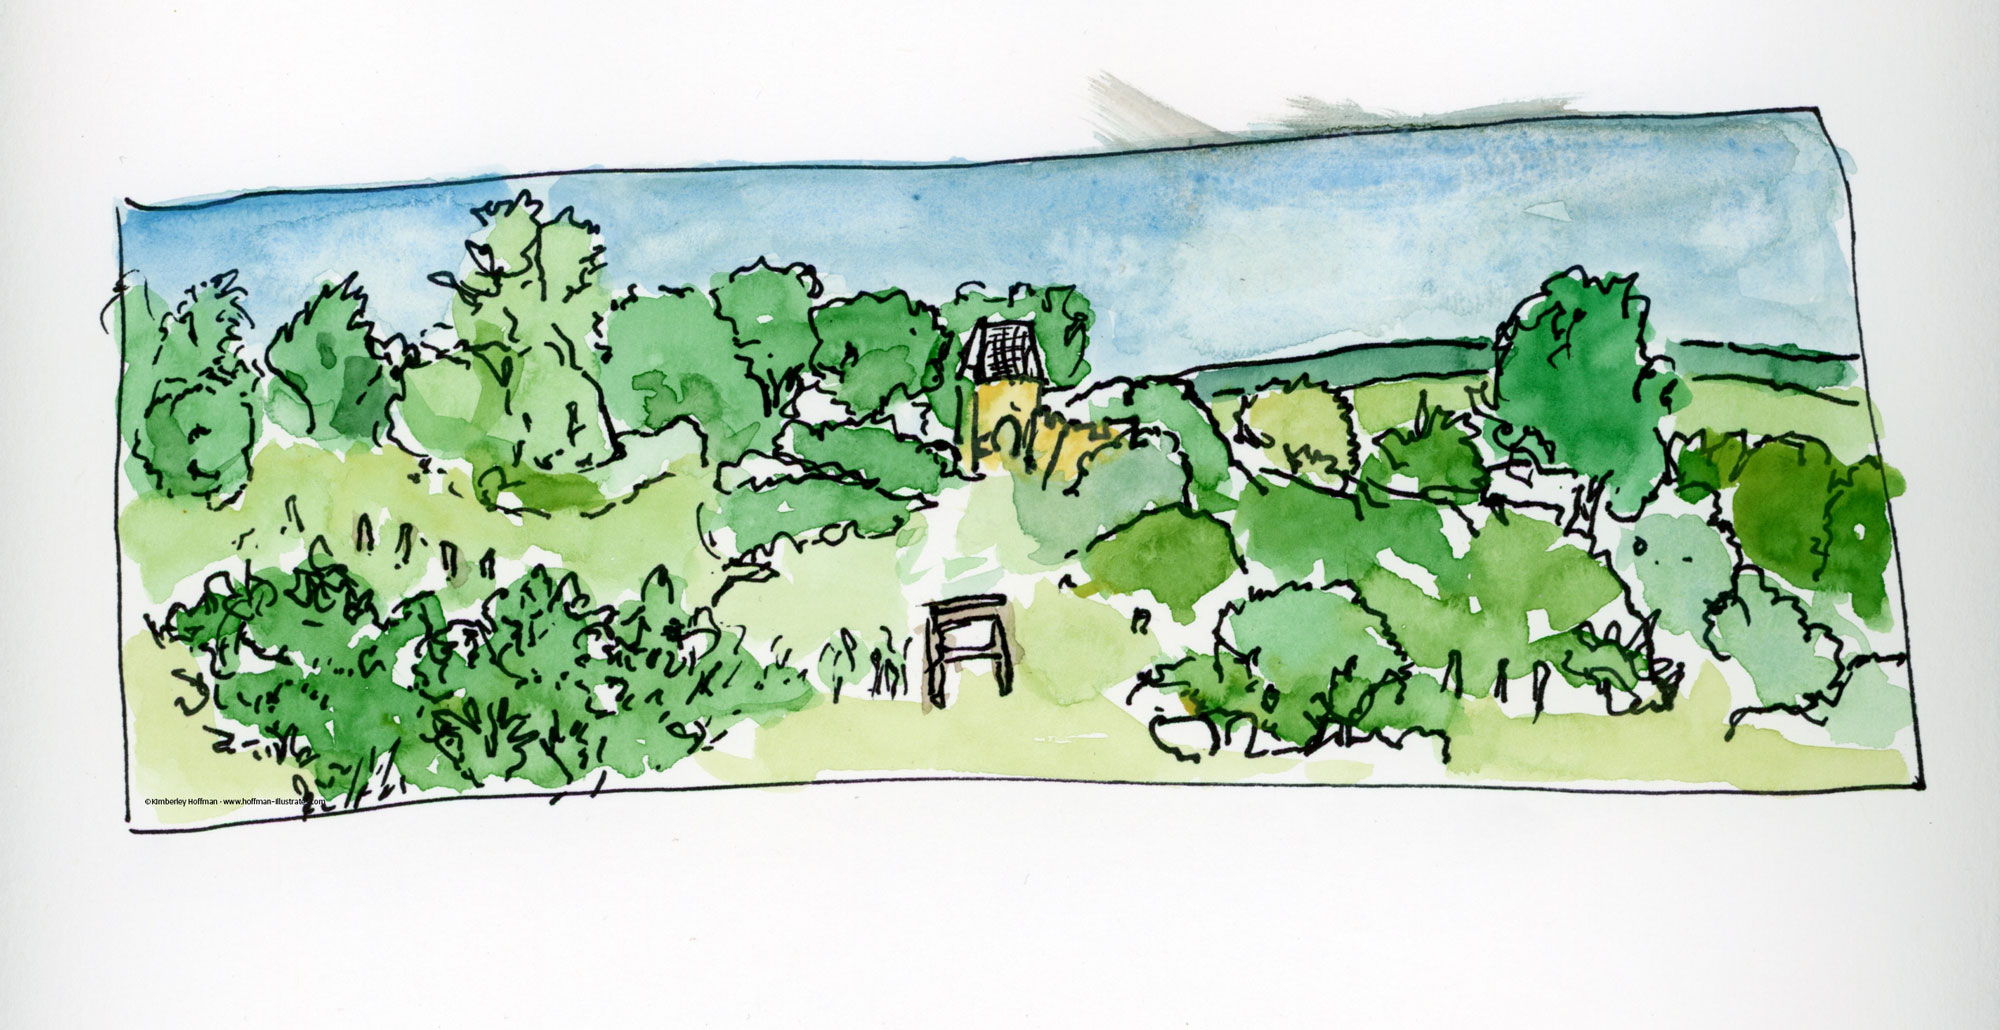 Landscape Watercolor Sketch at the Werlaburg Ruins in Germany.